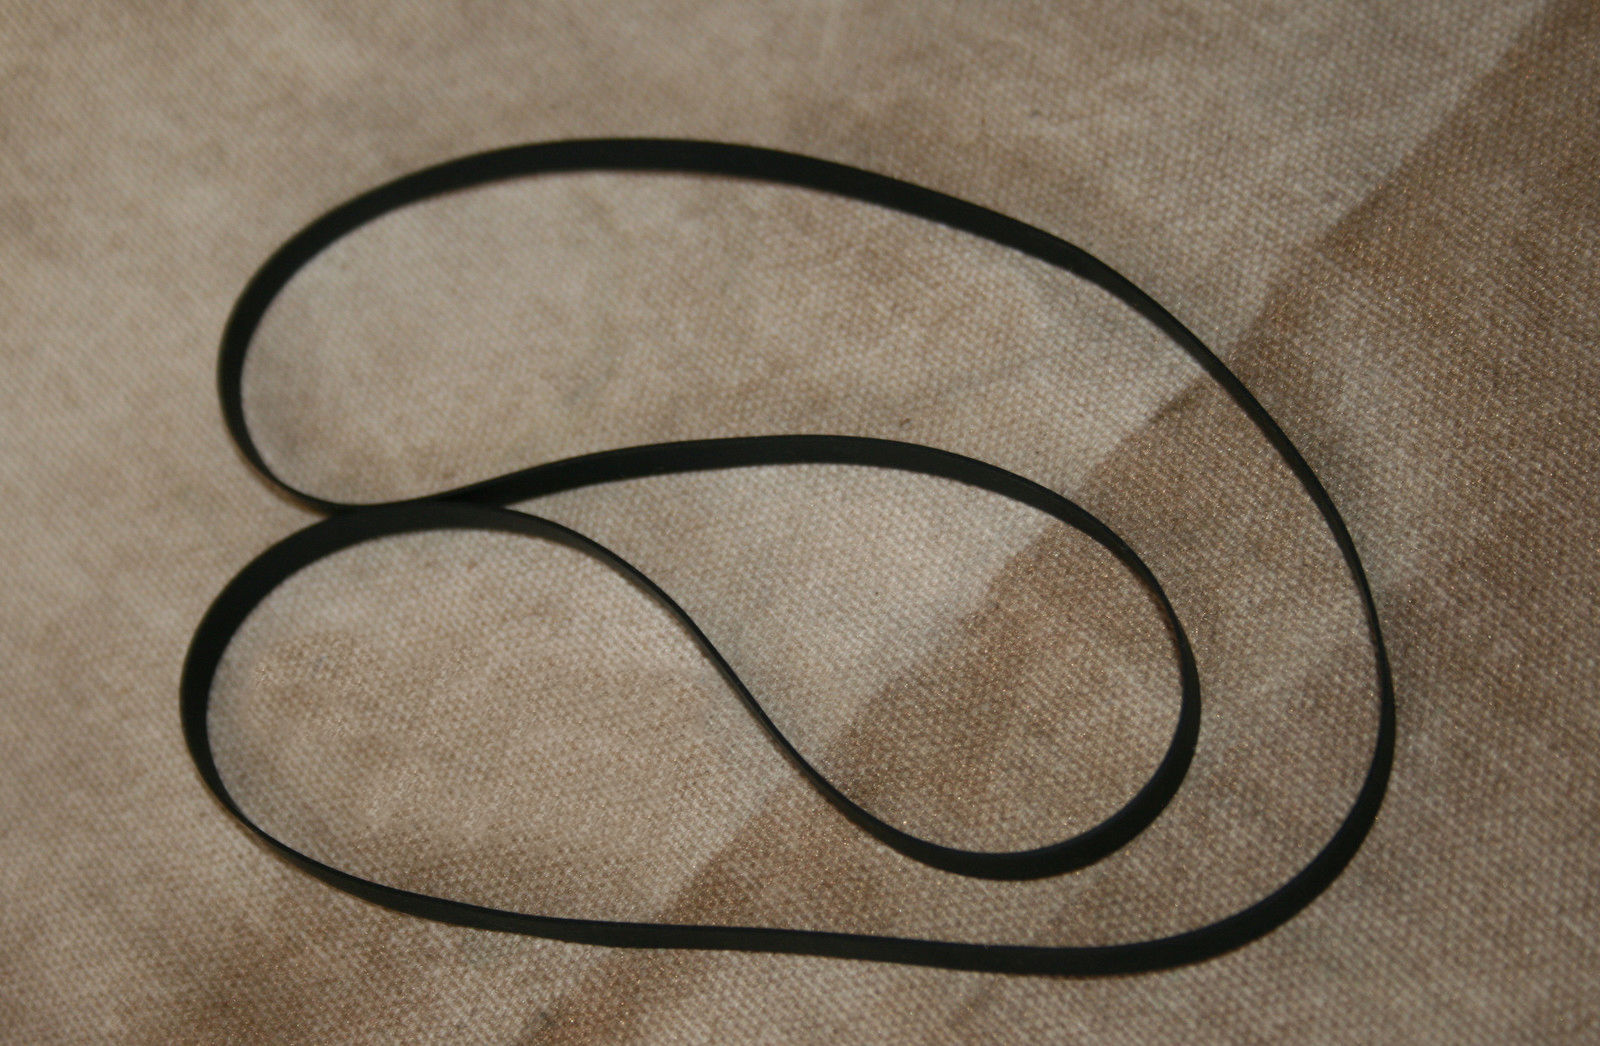 *New Replacement TURNTABLE DRIVE BELT* for MITSUBISHI LT-157  **HARD TO FIND**